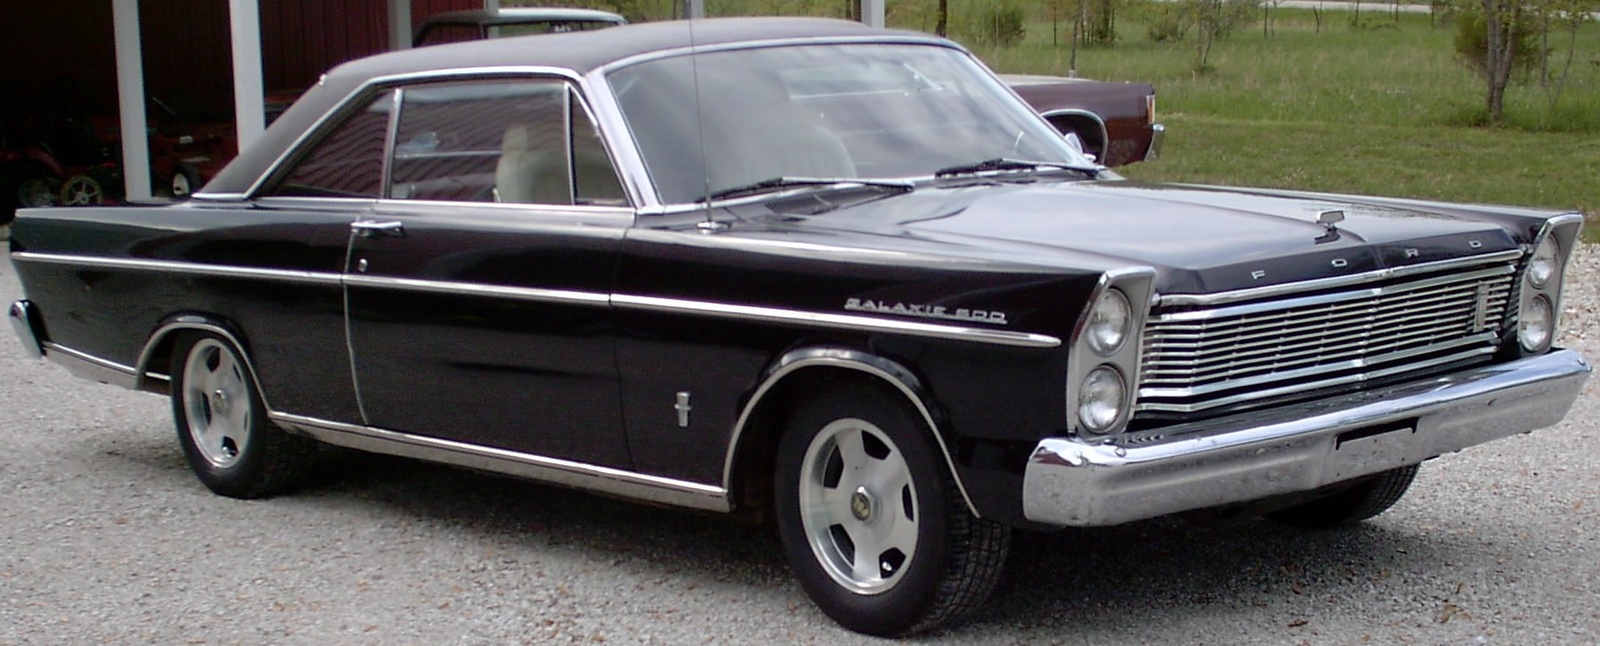 Ford galaxy pictures 1965